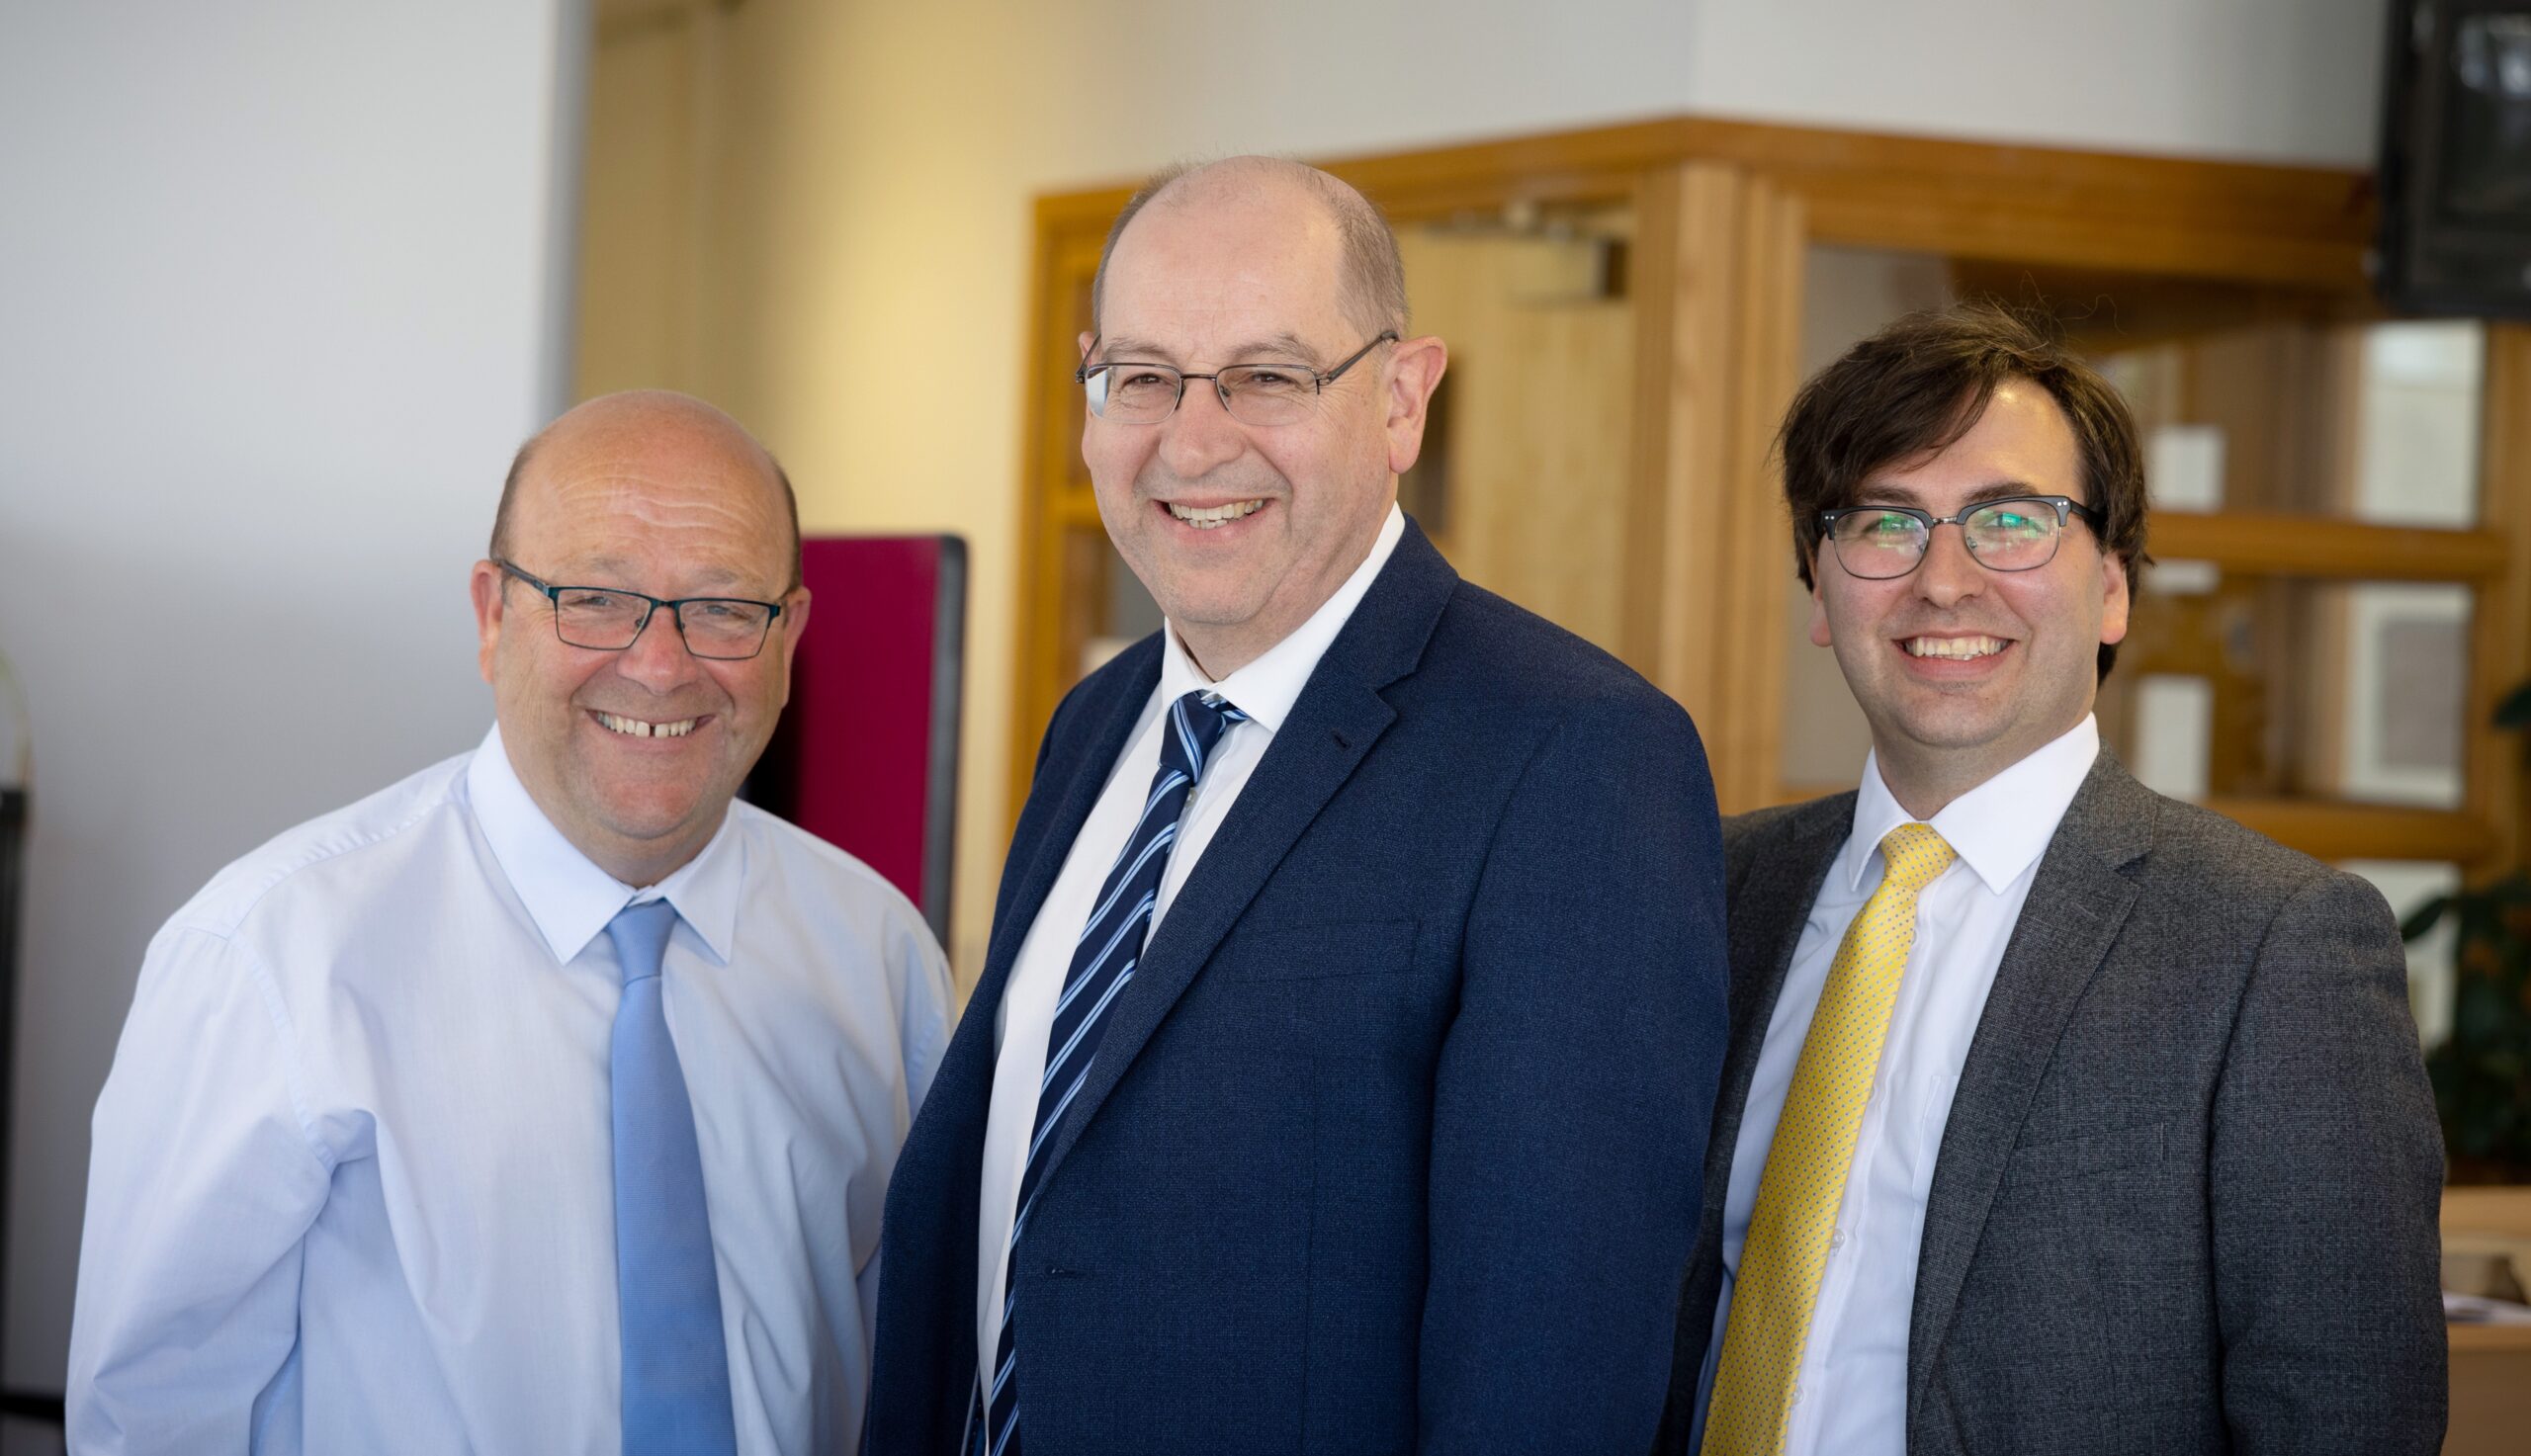 The Acquisition of Douglas Clift & Co Solicitors